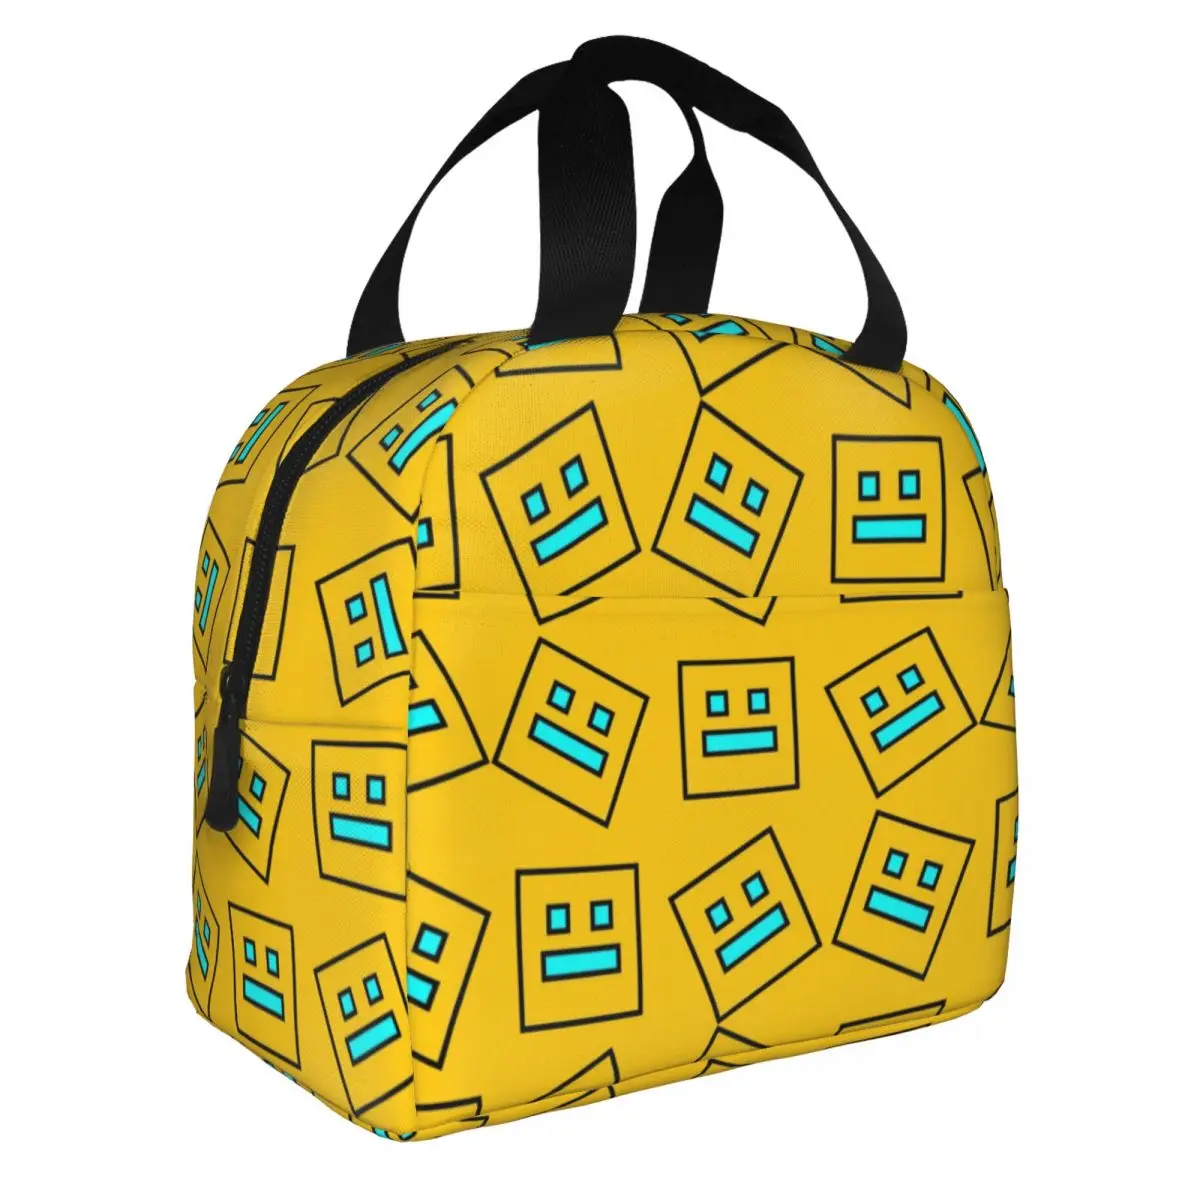 

Geometry Cube Dash Gaming Insulated Lunch Bags Cooler Bag Meal Container Leakproof Tote Lunch Box Girl Boy Office Travel